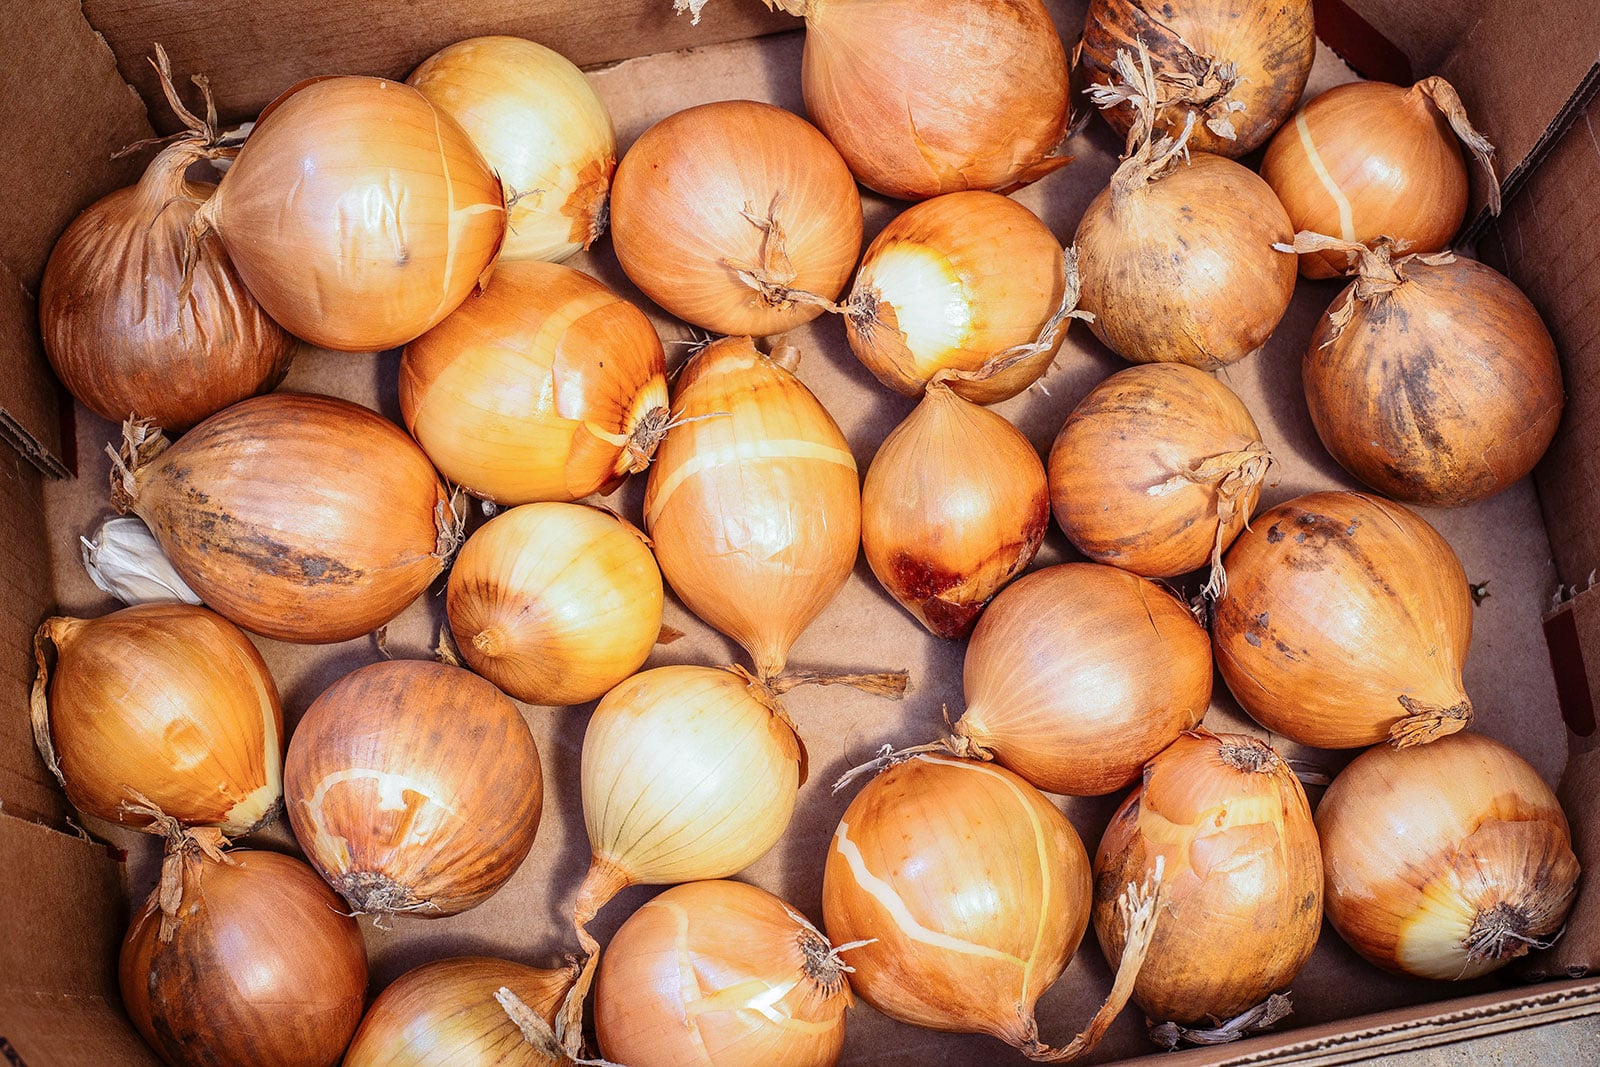 Yellow onions stored in a cardboard box